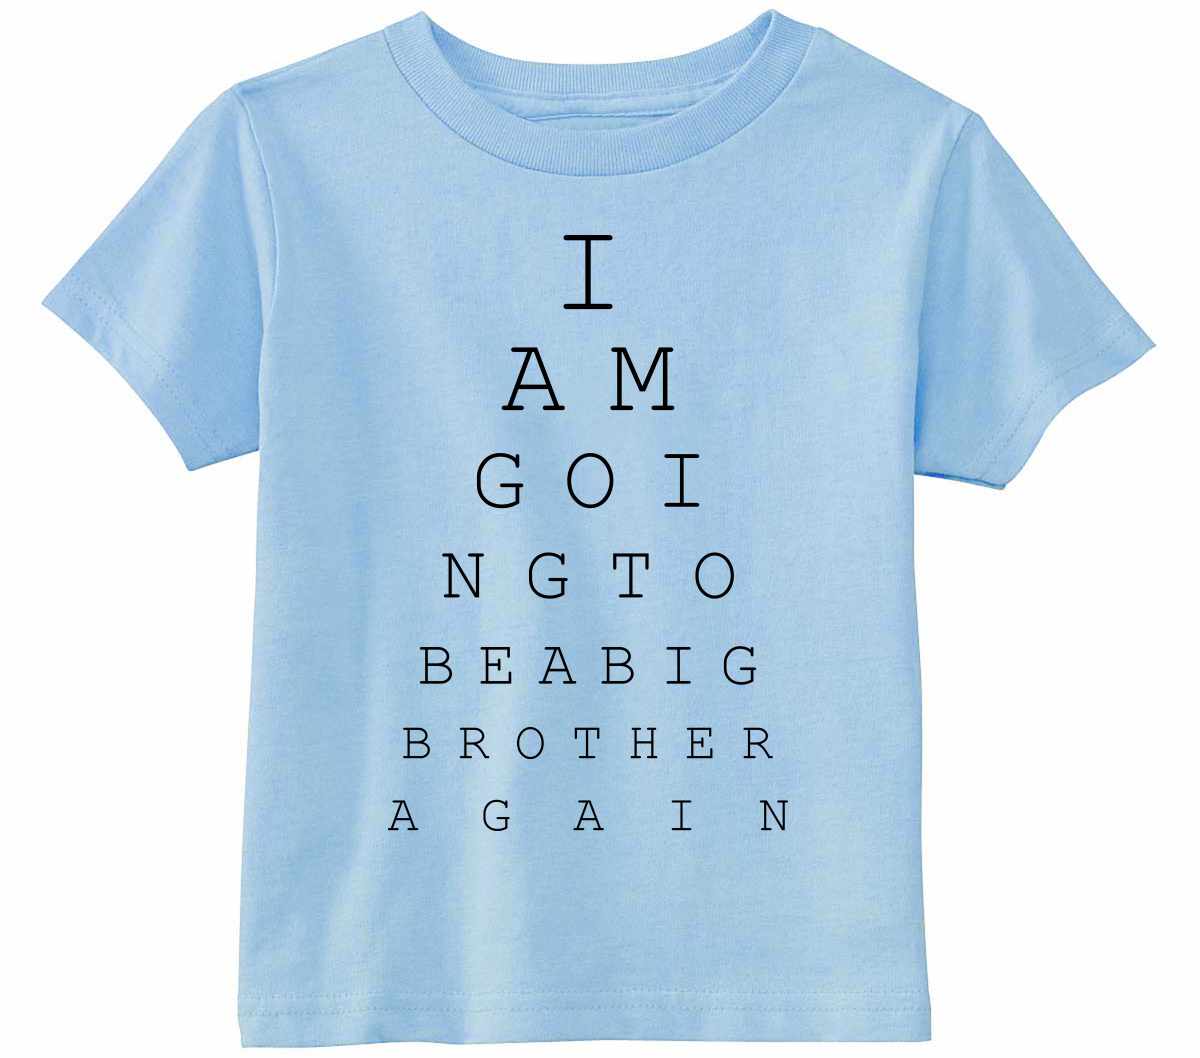 Big Brother Again Eye Chart on Infant-Toddler T-Shirt (#1265-7)